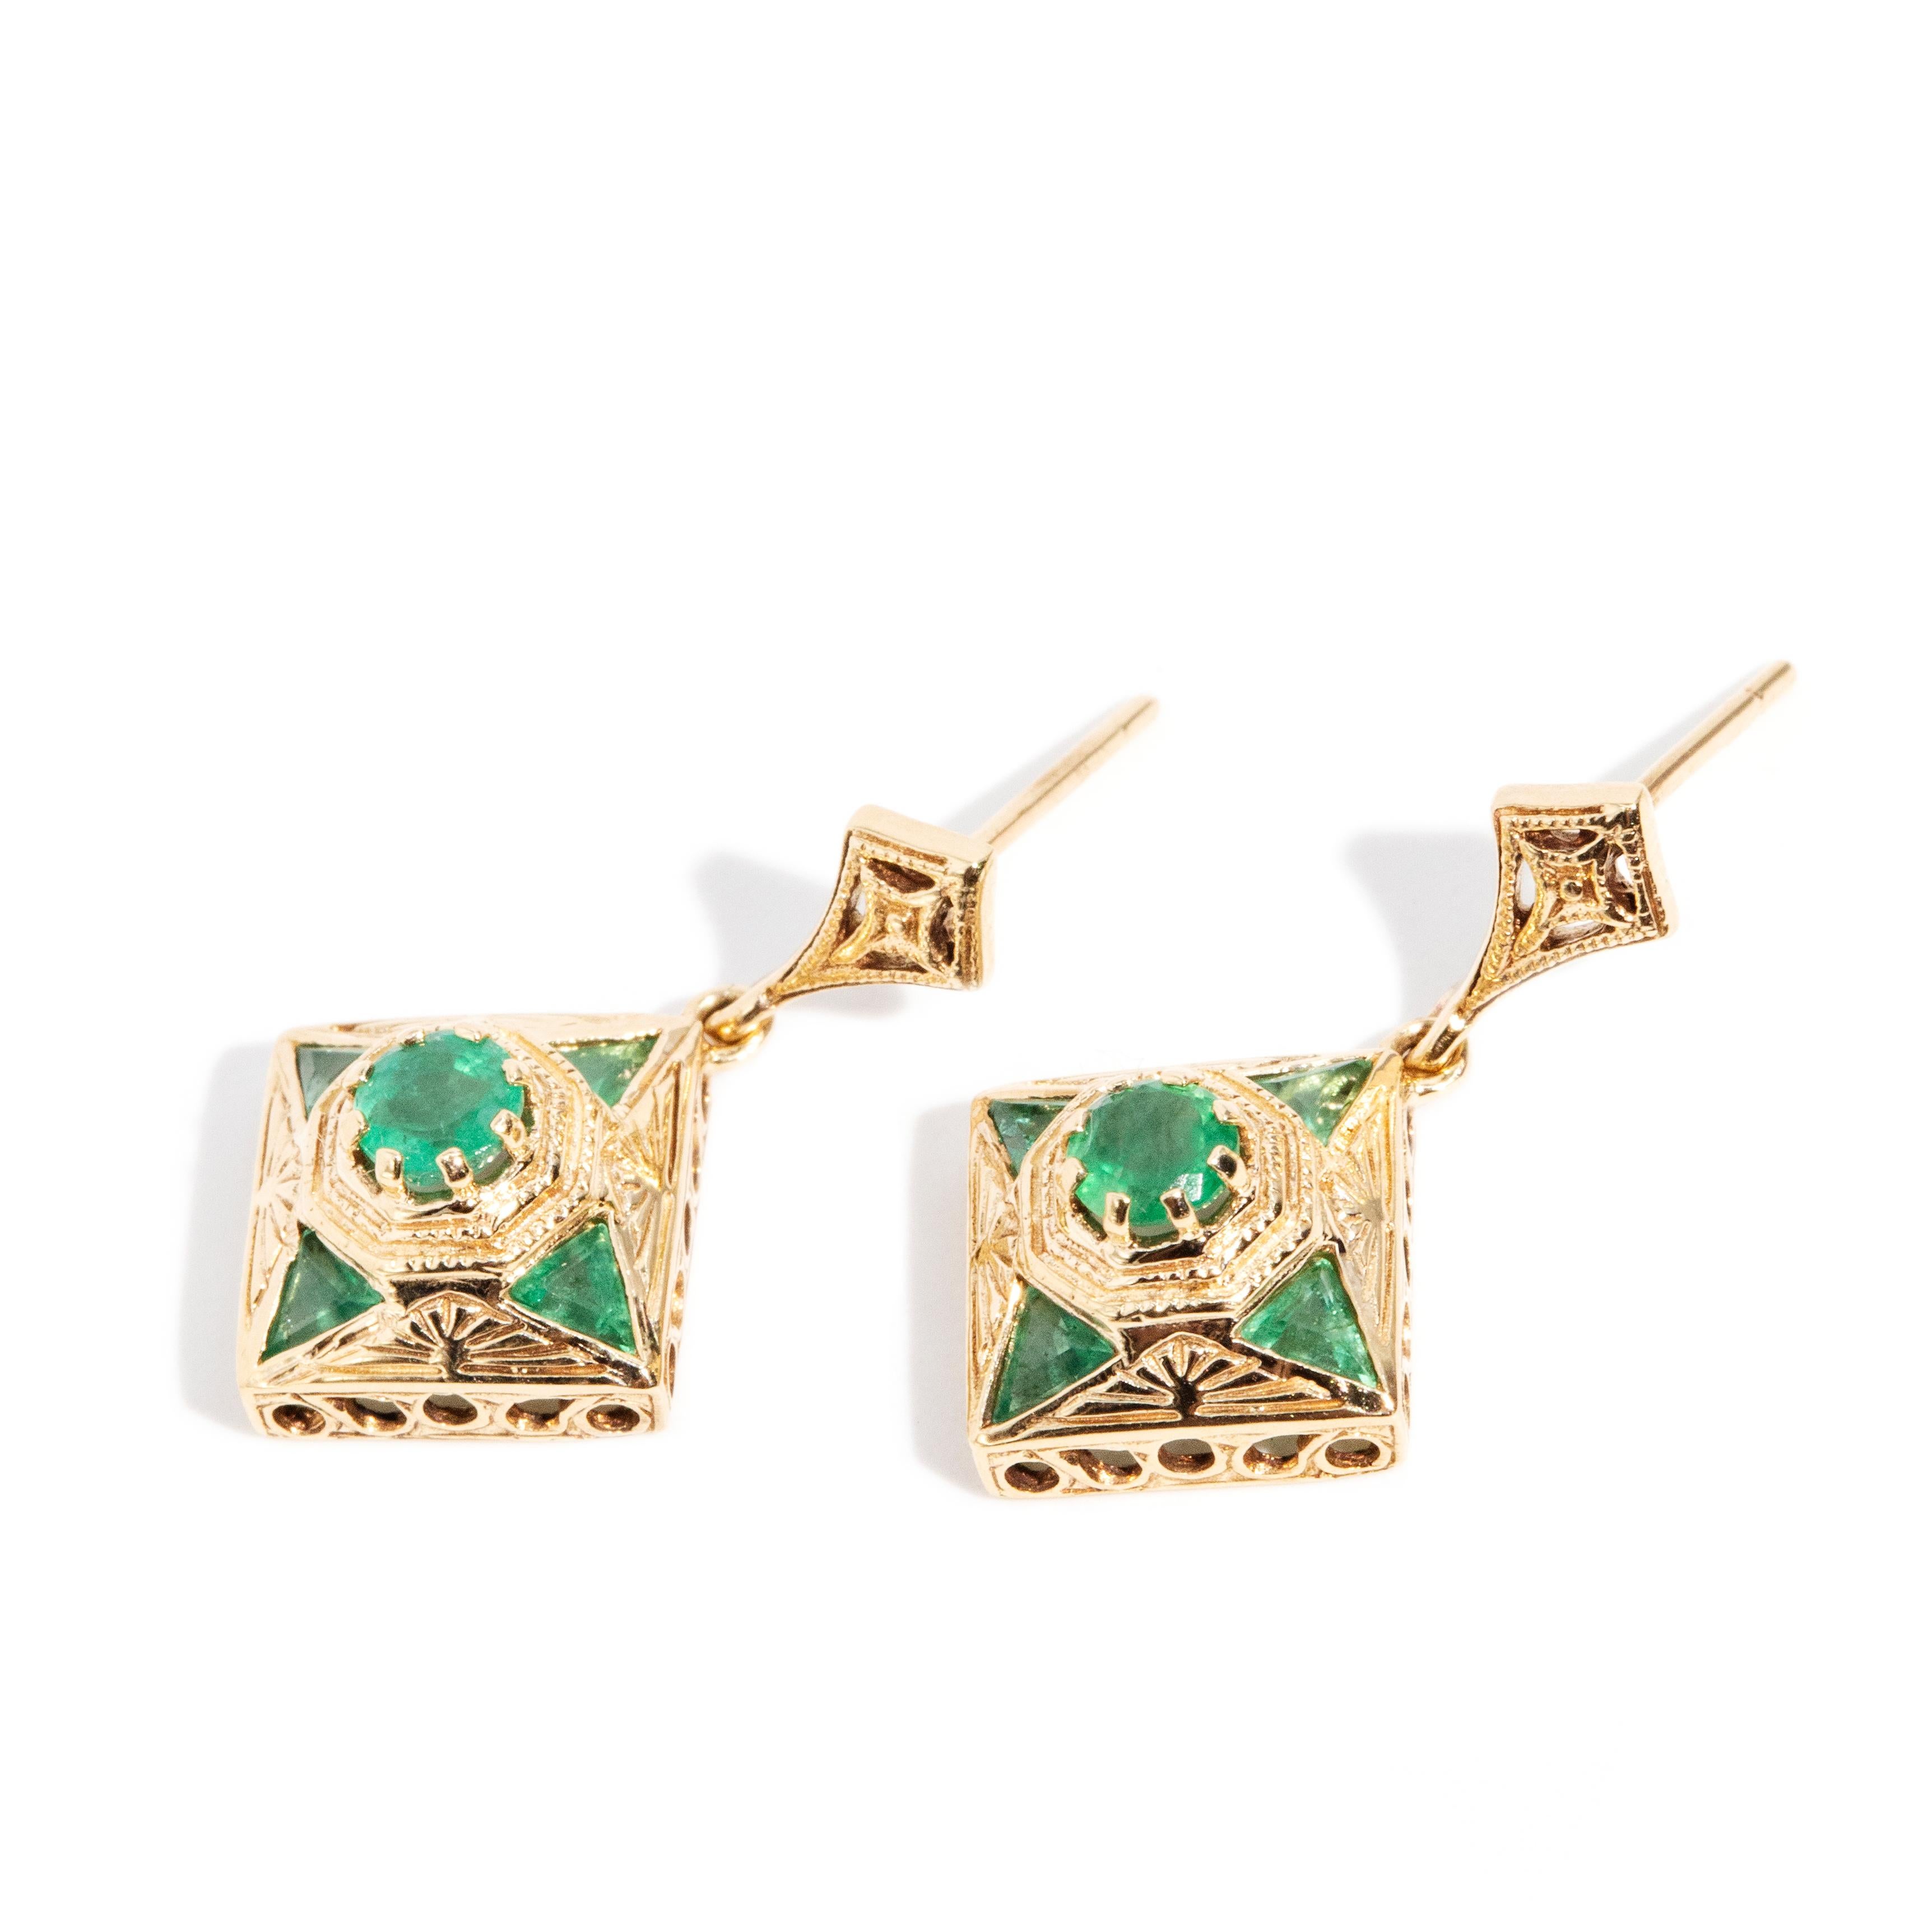 Round Cut Vintage Inspired Art Deco Style Bright Green Emerald Drop Earrings 9 Carat Gold For Sale